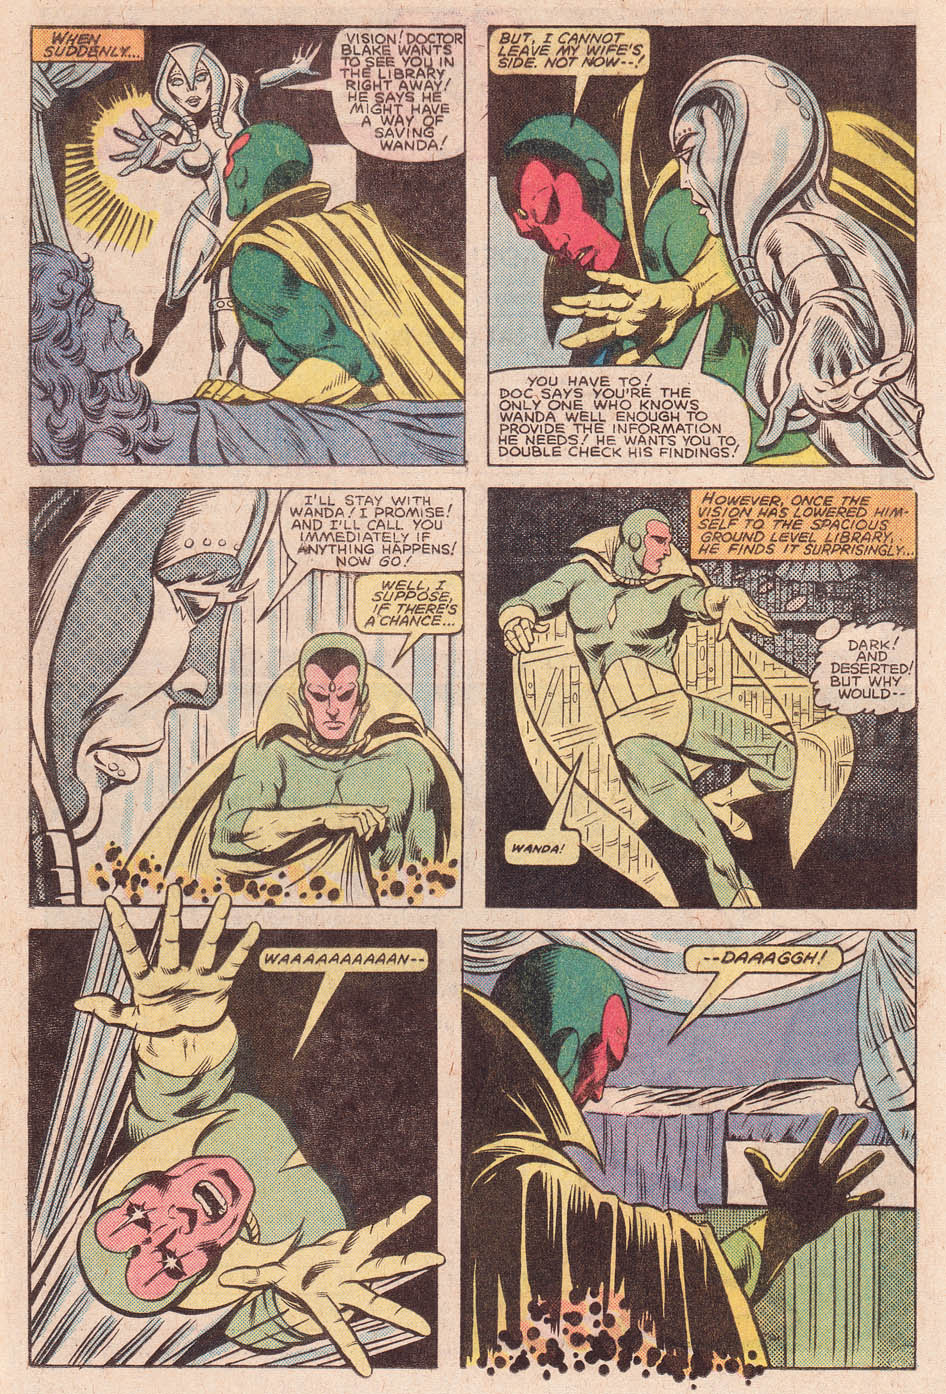 What If? (1977) issue 38 - Daredevil and Captain America - Page 12